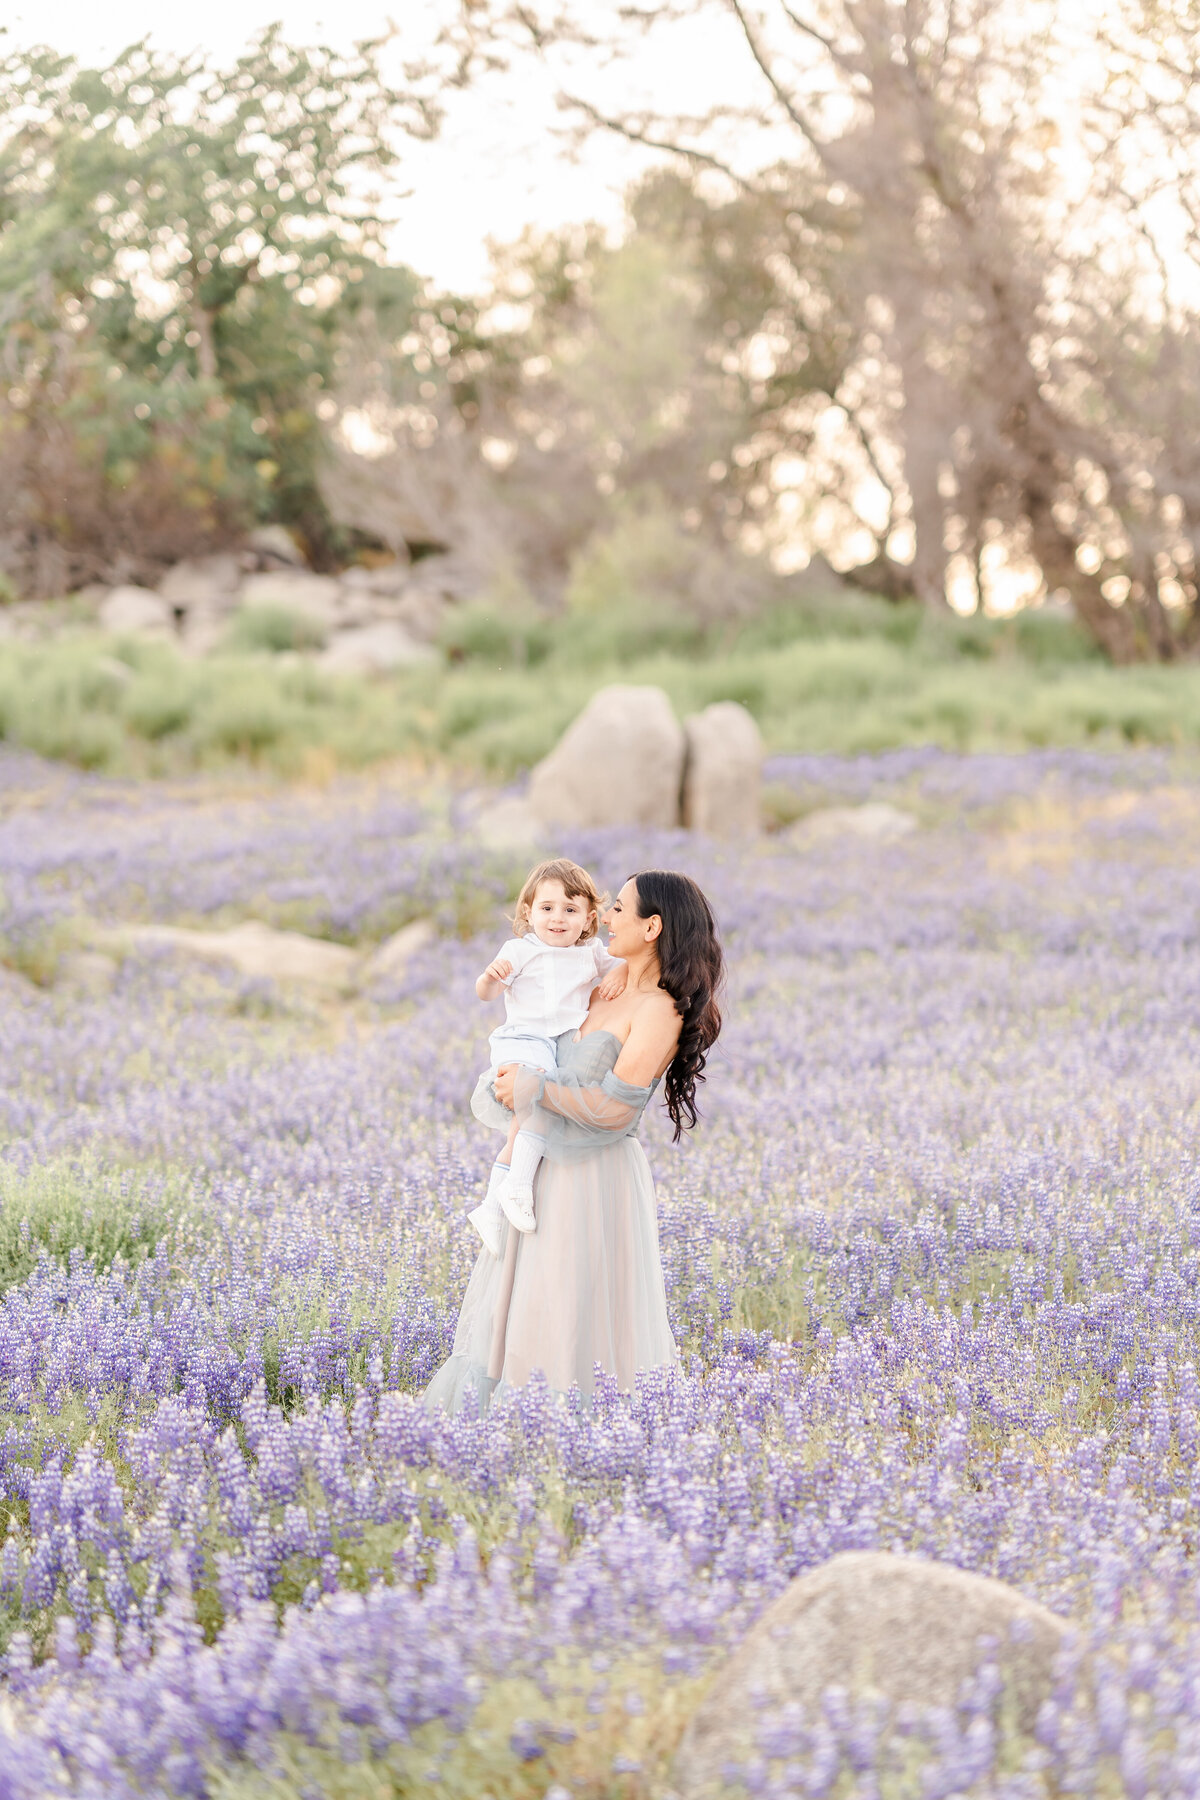 A mother stands in a field of purple lupines wearing a long light grey gown holding and staring lovingly at her son photographed by bay area photographer, Light Livin Photography.